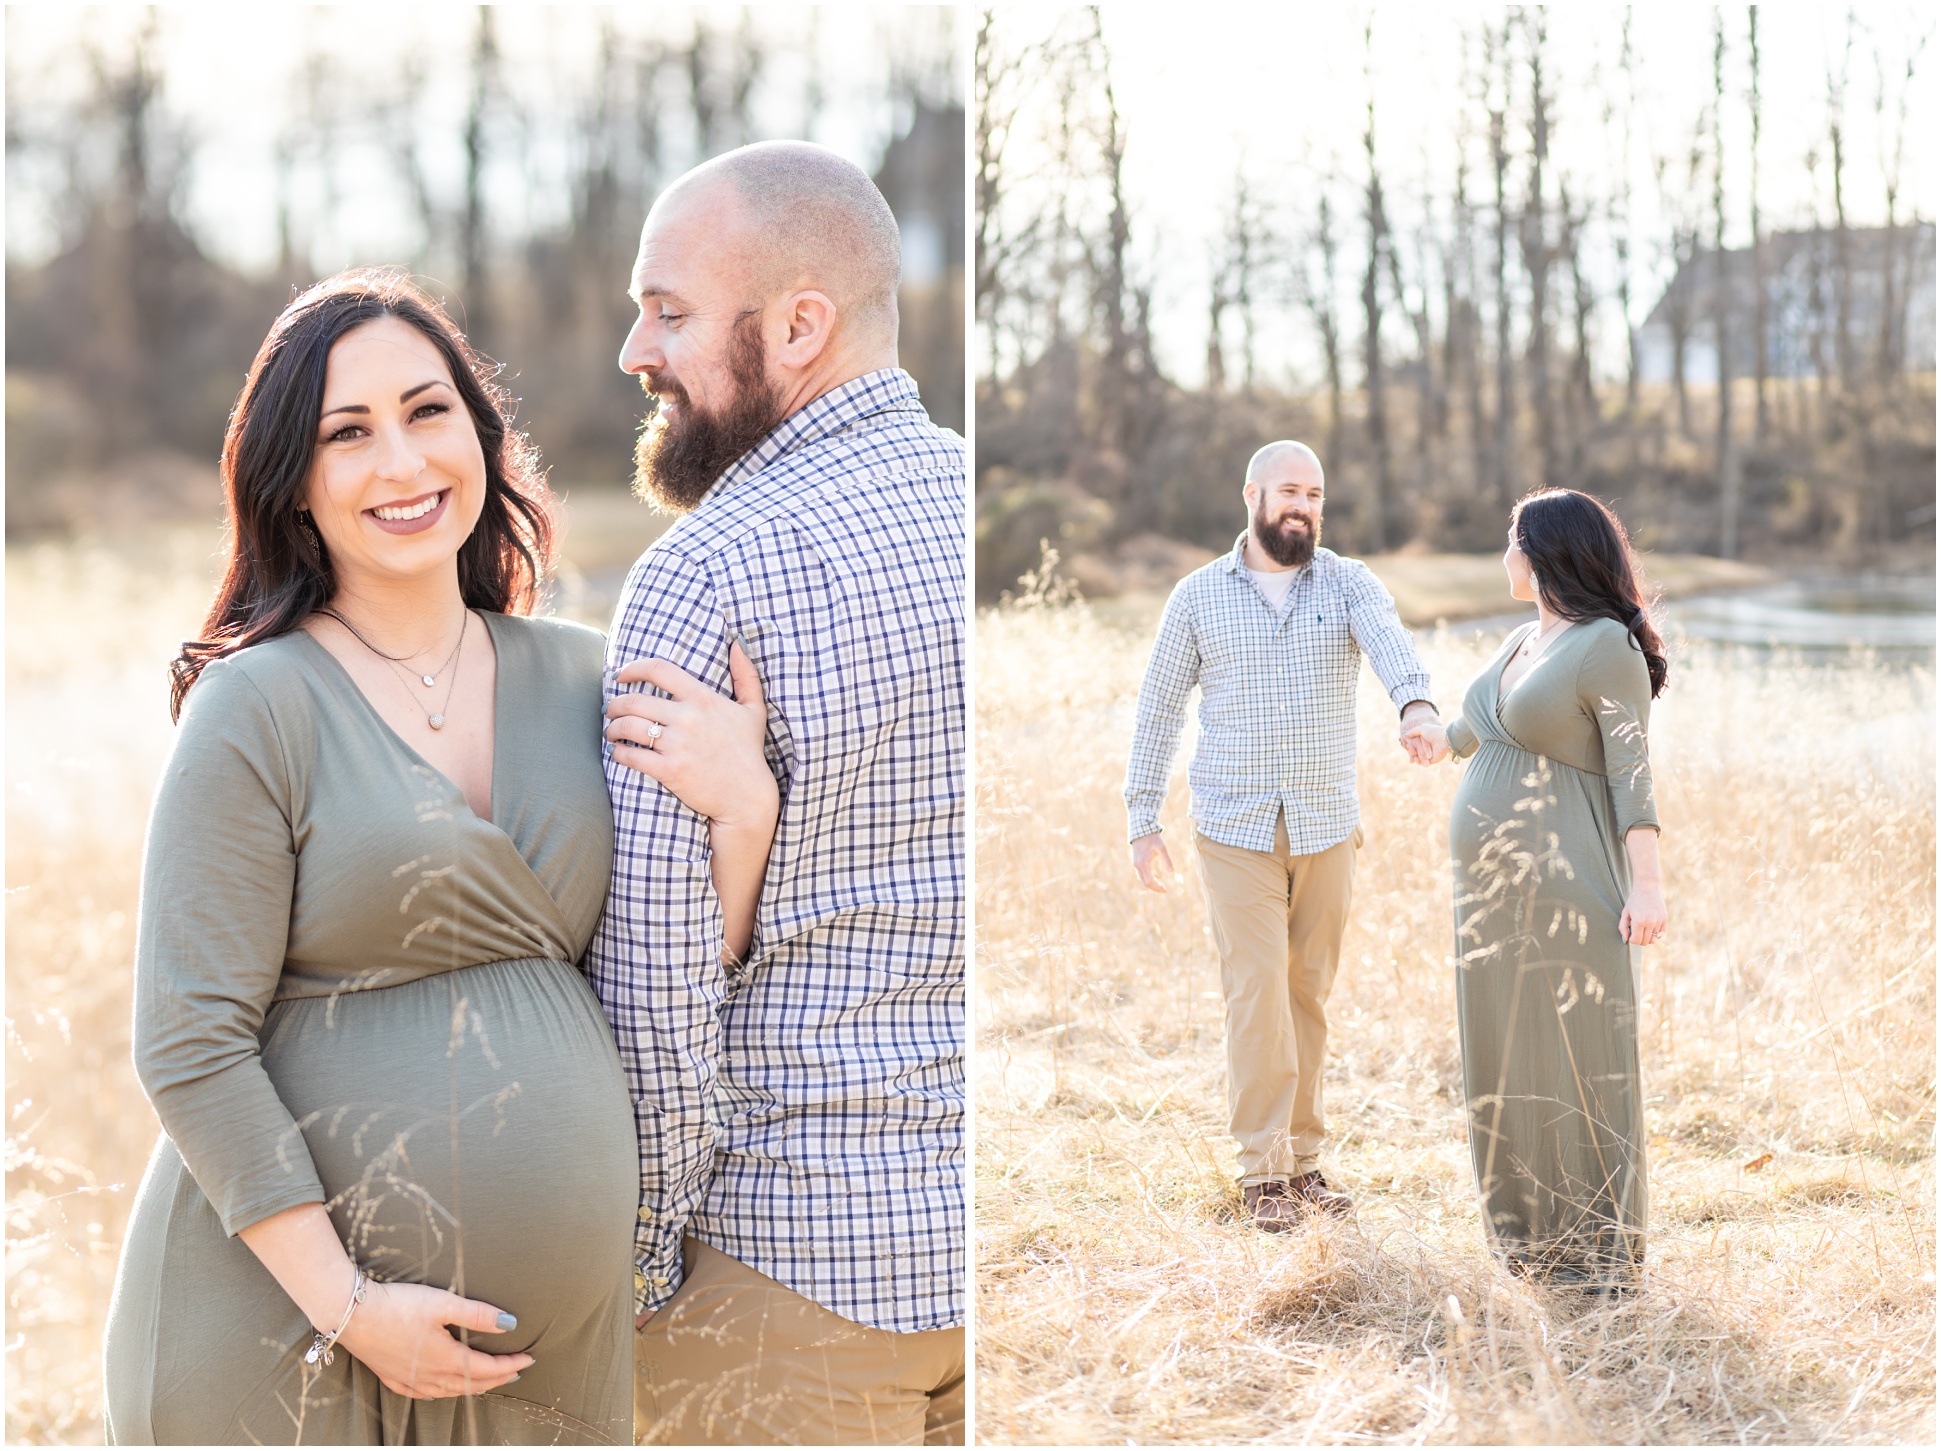 Two Image from A Maternity Session, left close up, right wide shot of mom and dad. Mom-to-be wearing green maternity dress